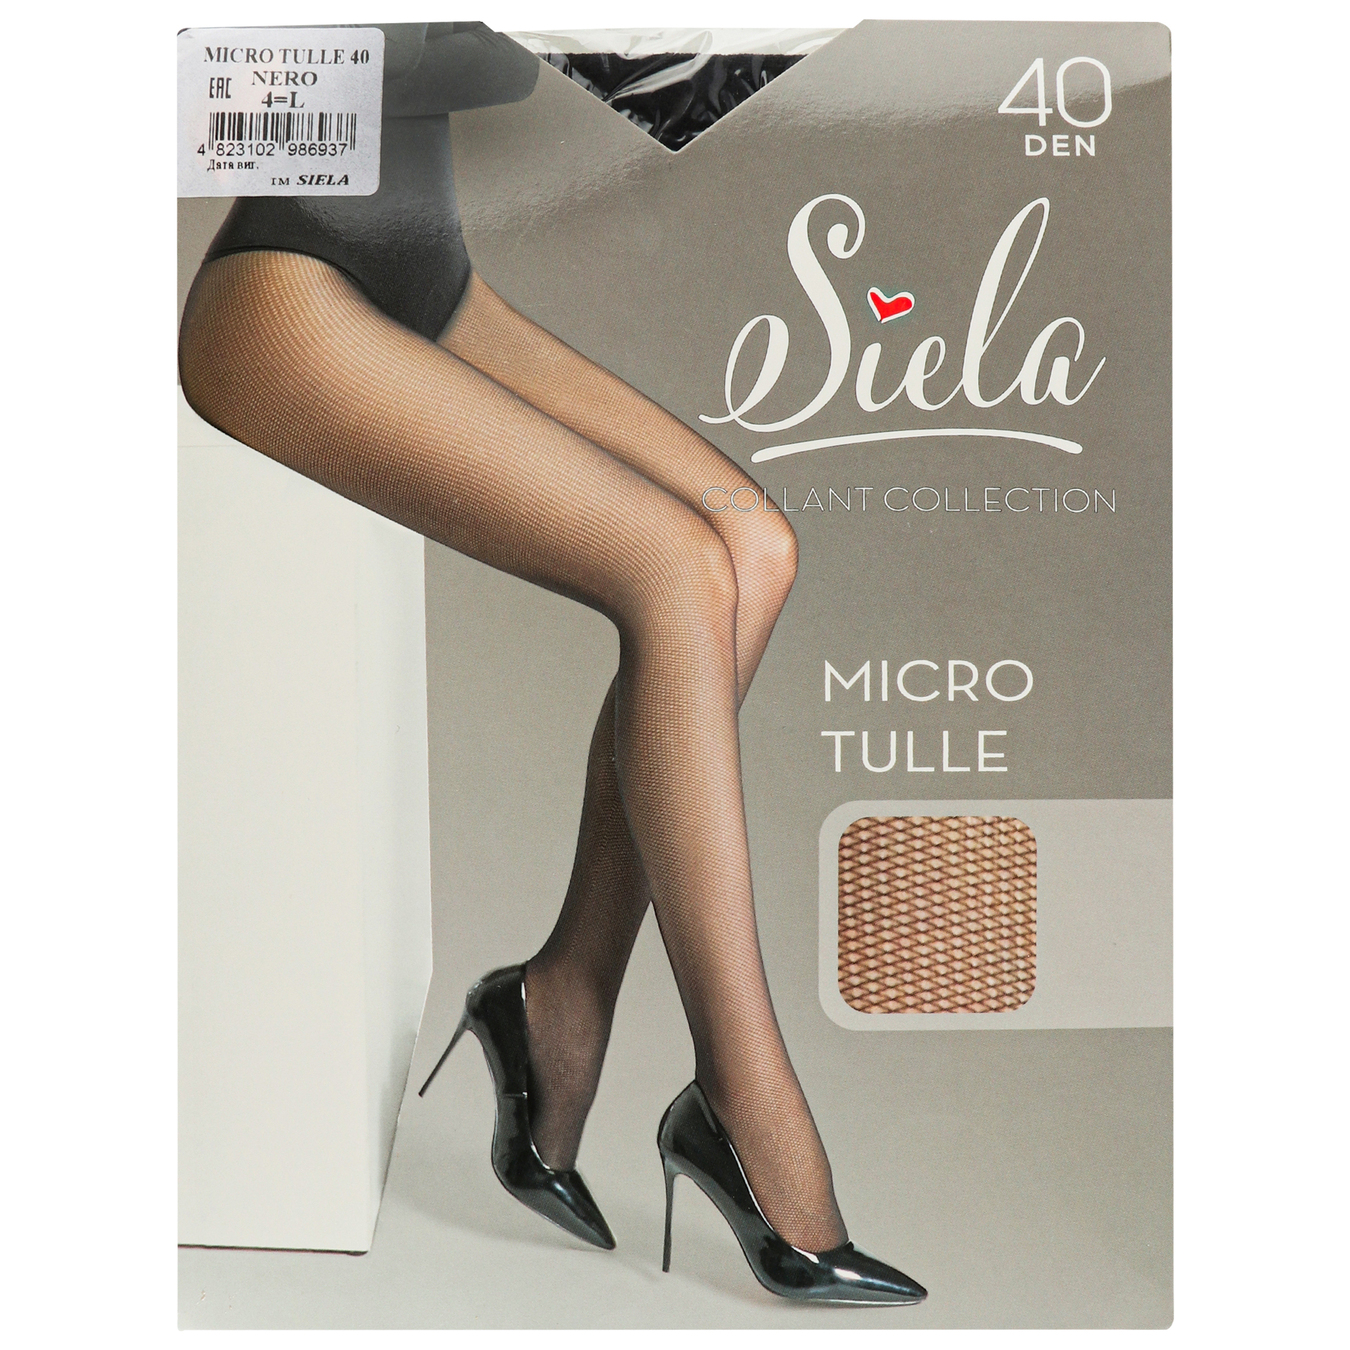 Women's tights Siela Tulle 40den nero size 4 ᐈ Buy at a good price from  Novus